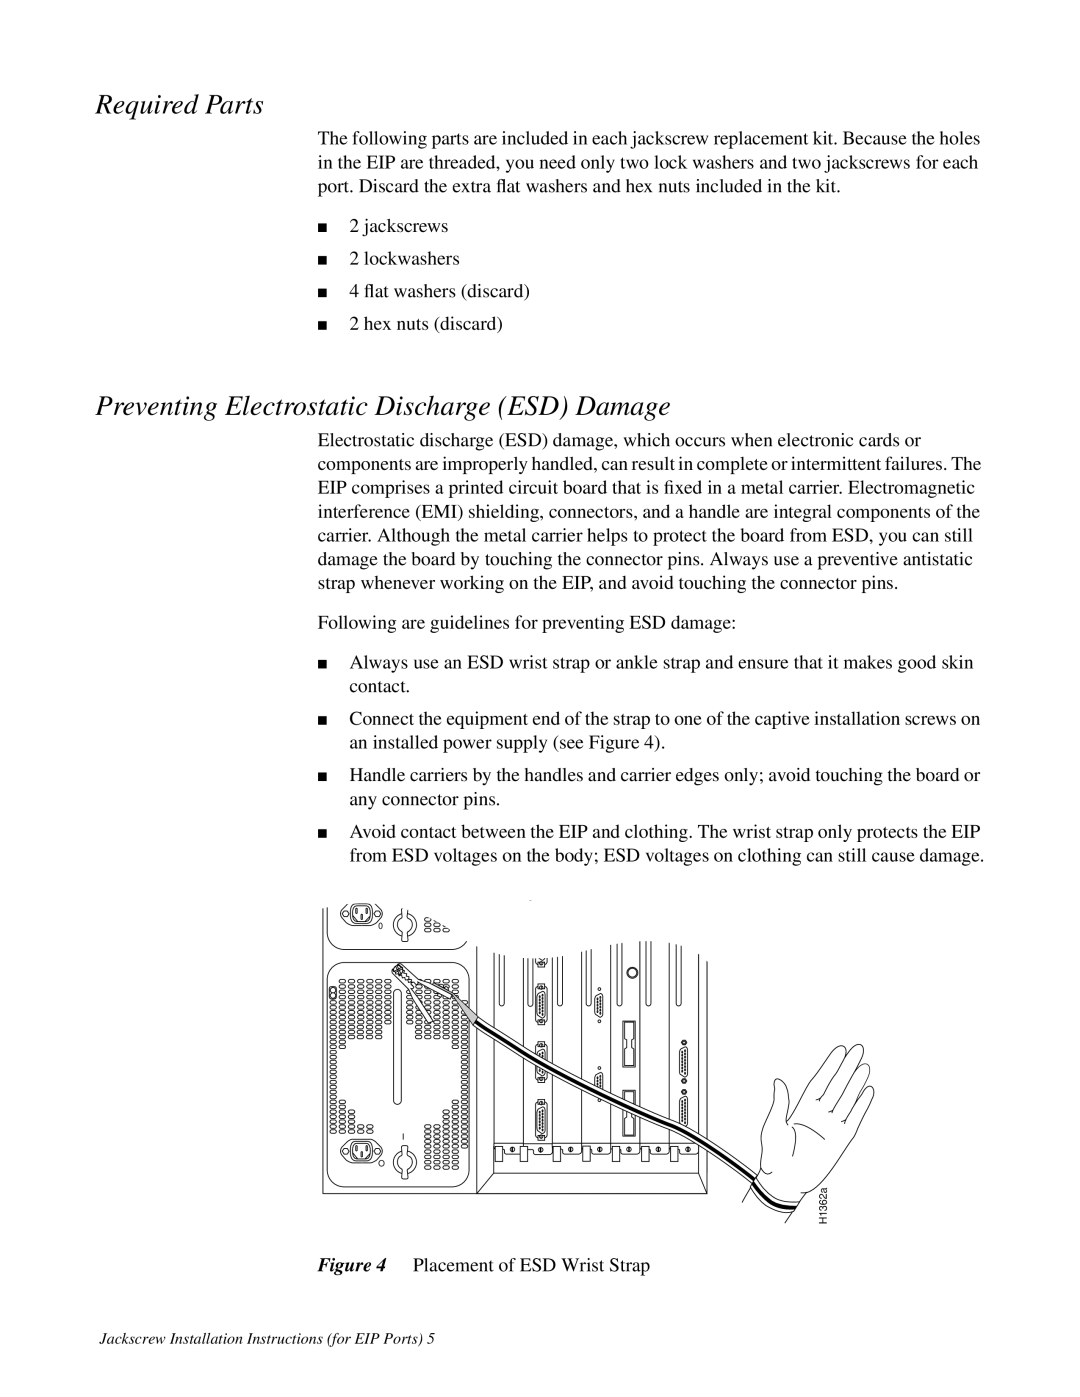 Cisco Systems Jackscrew installation instructions Required Parts, Preventing Electrostatic Discharge ESD Damage 